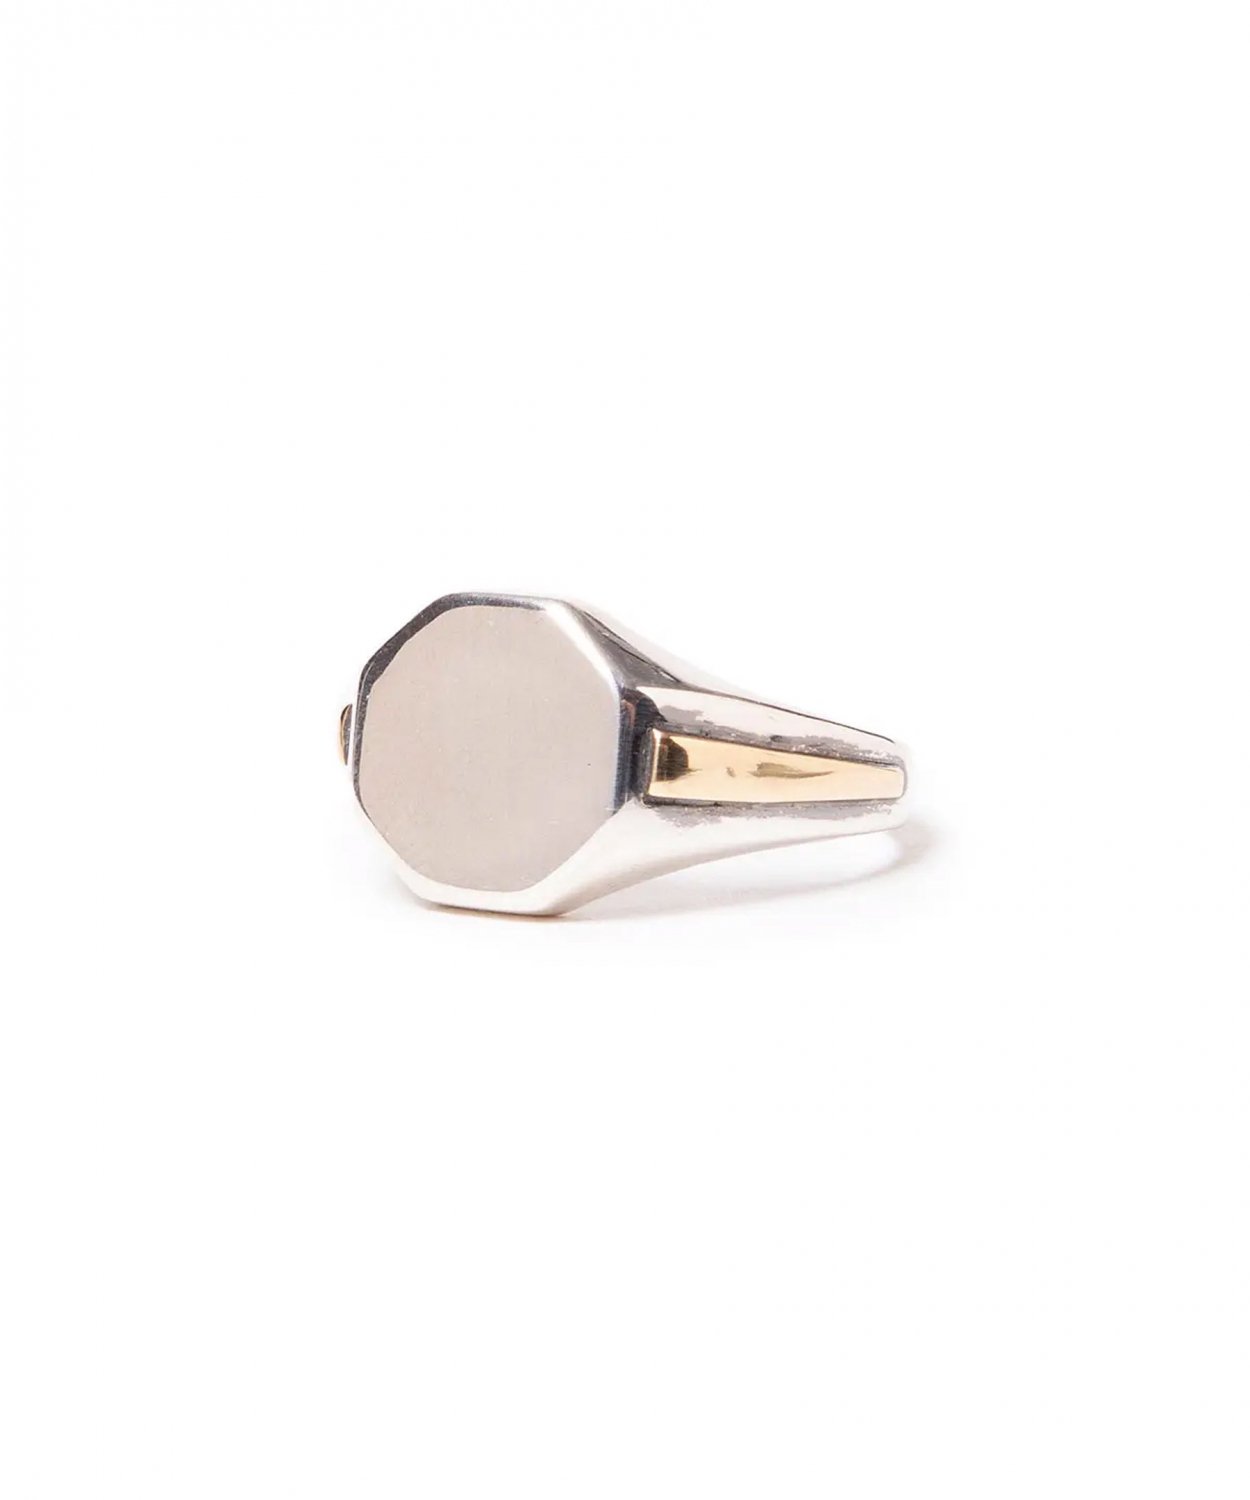 HOBO / SIGNET RING 925 SILVER with BRASS